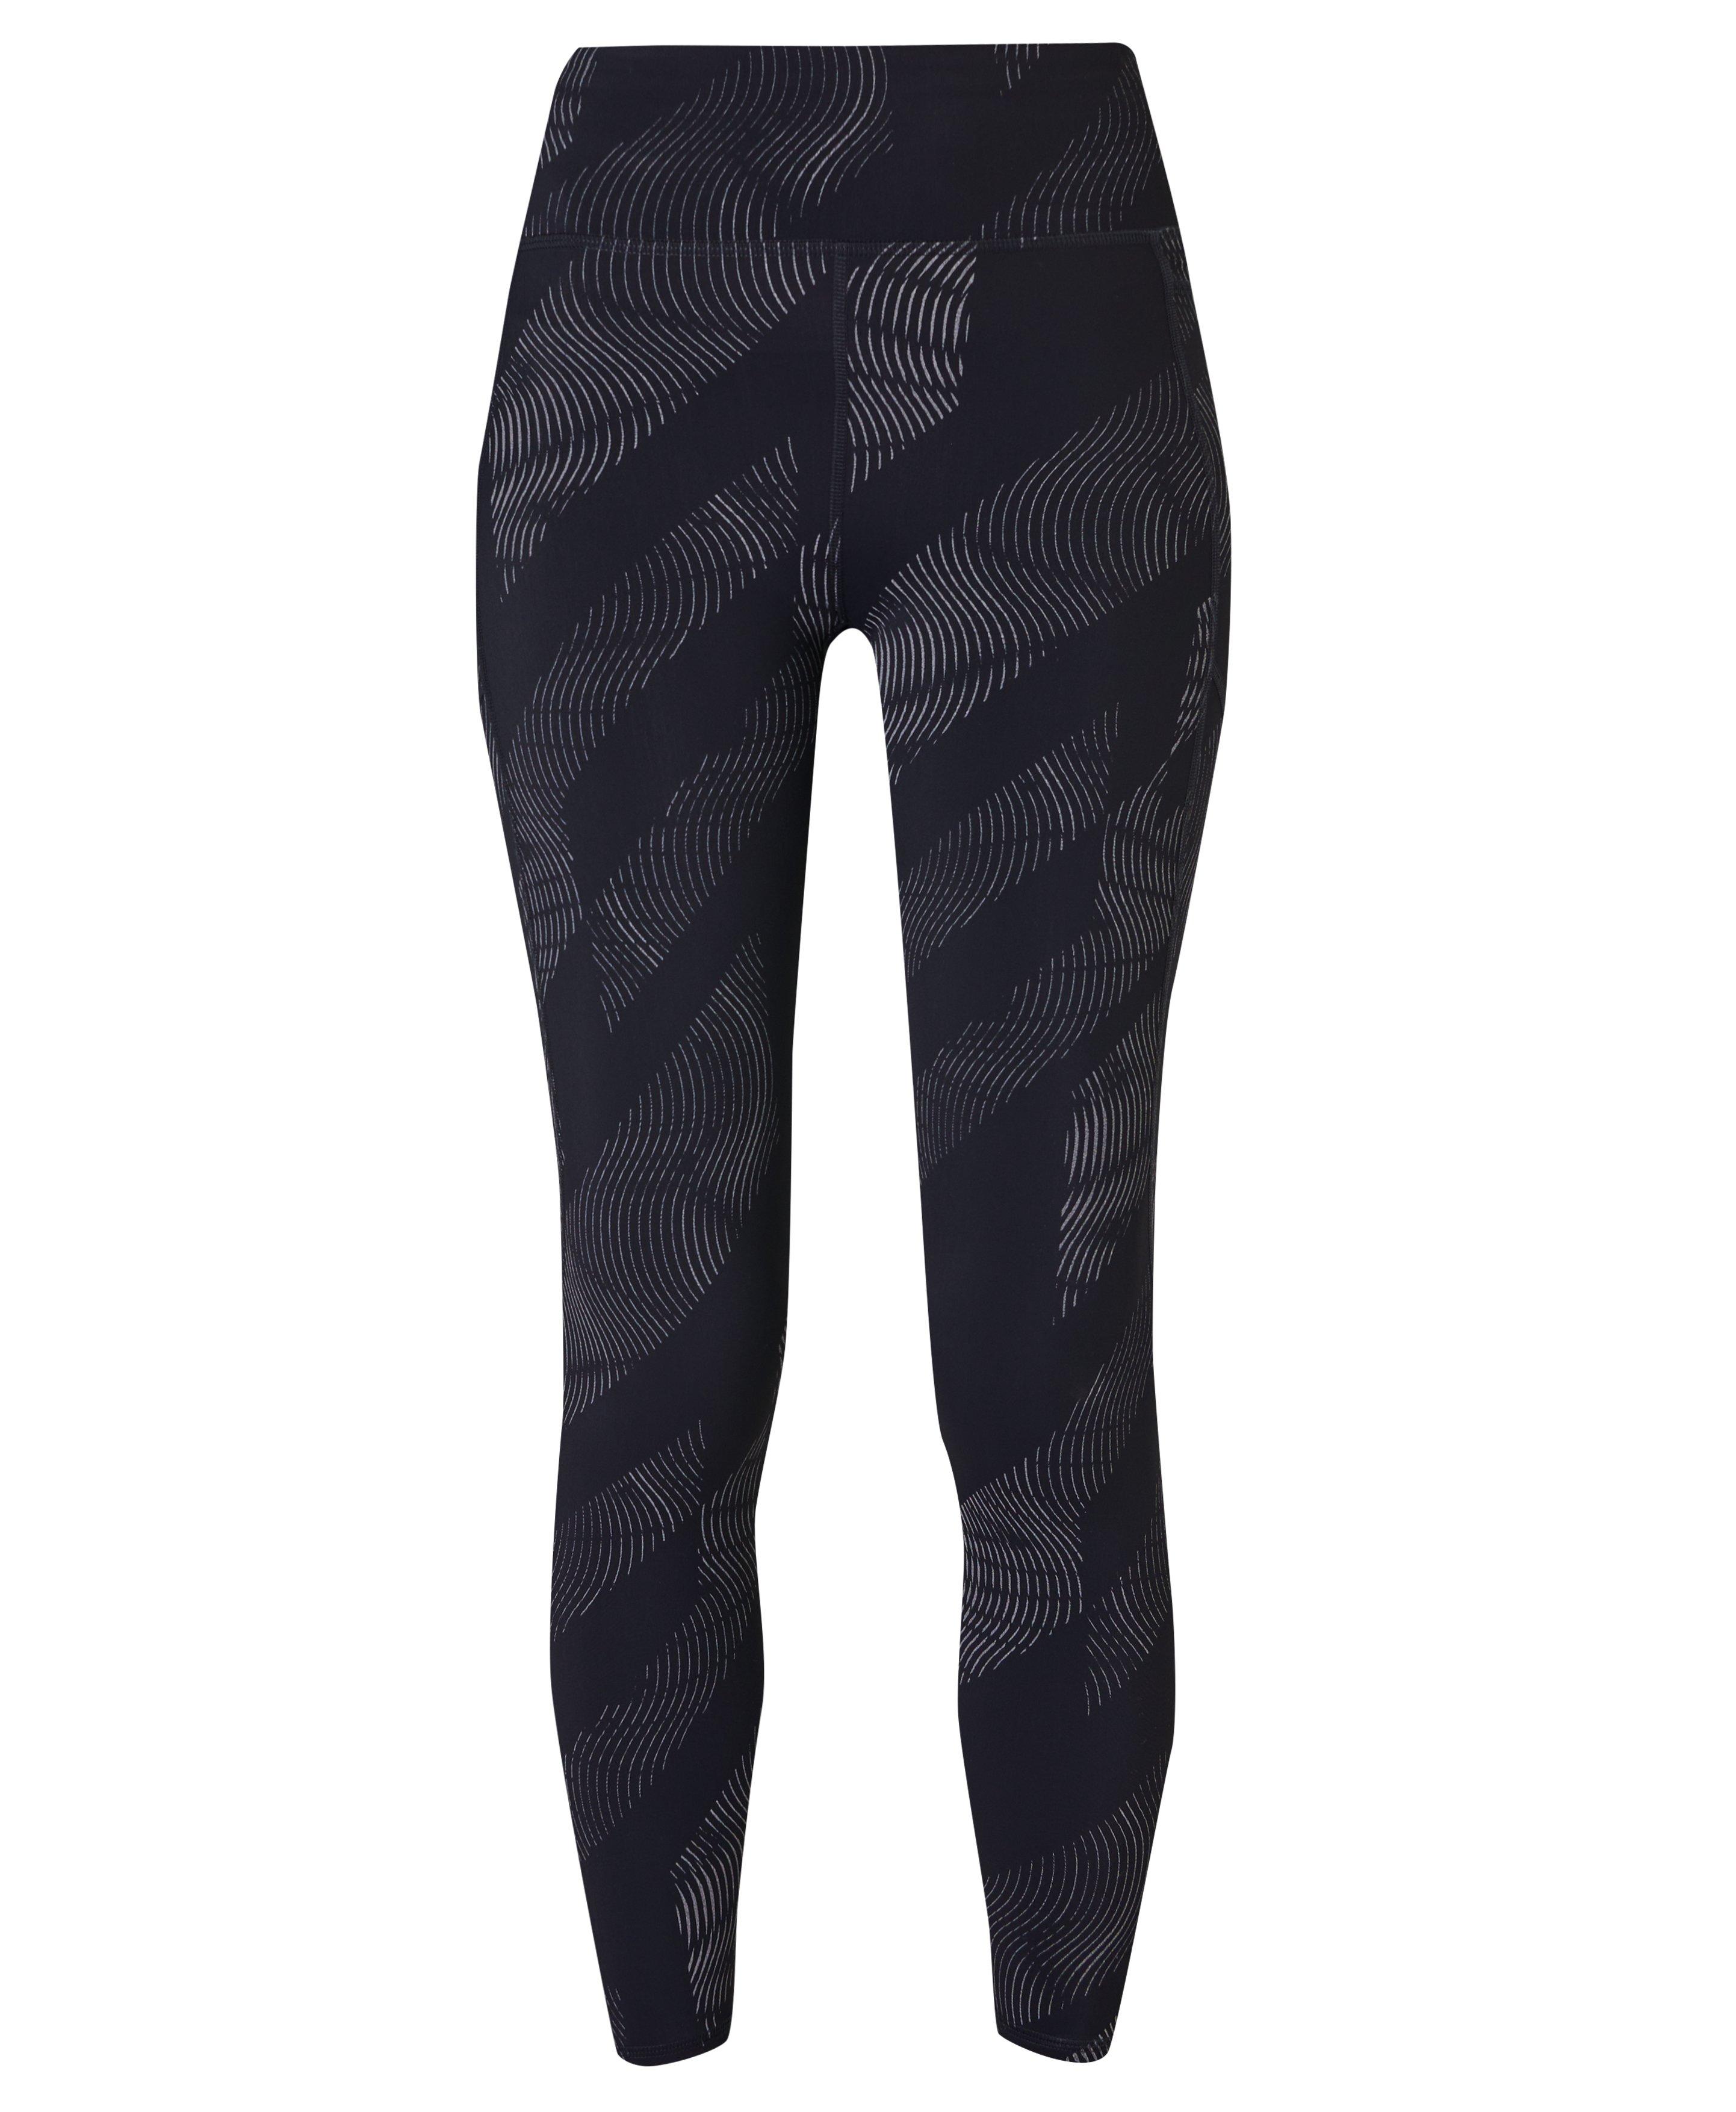 The Nike Printed Reflective Women's Running Tights.